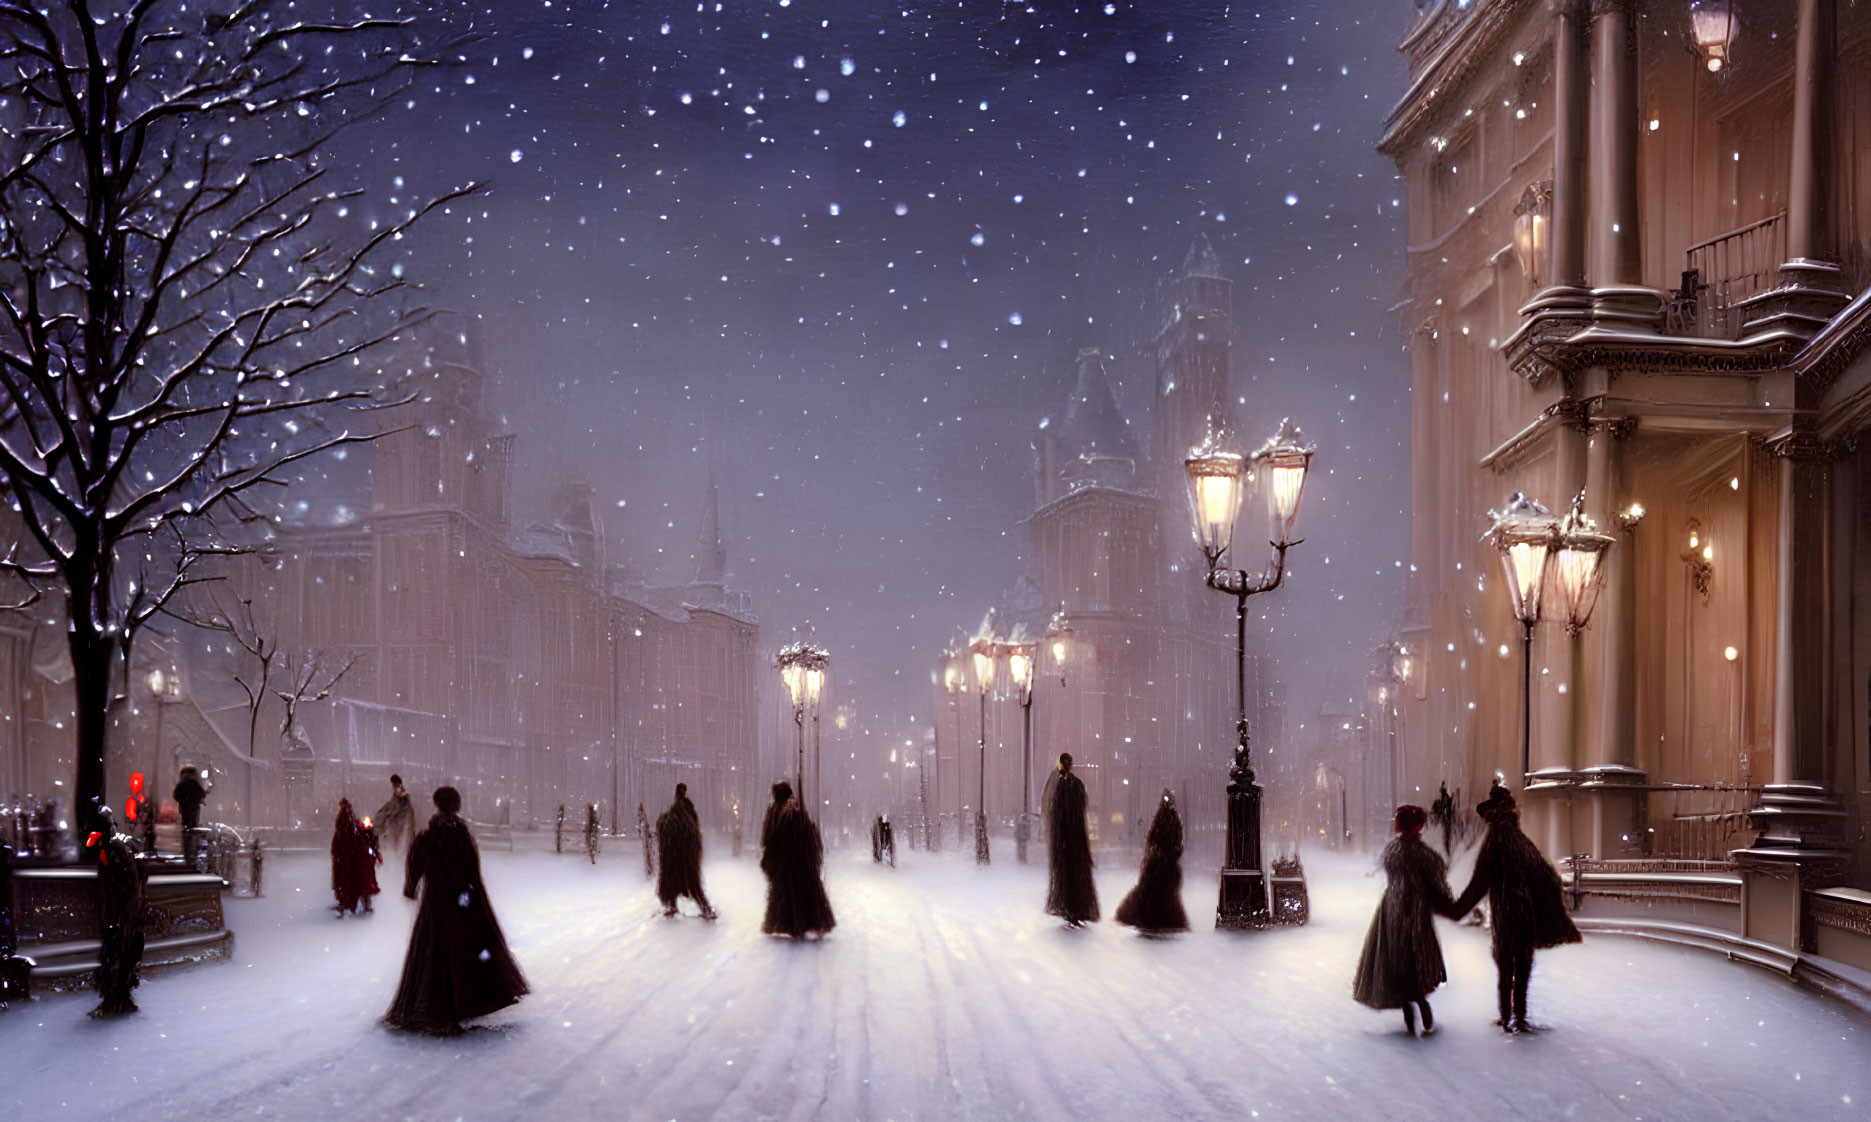 Victorian-era people in dark cloaks on snow-covered street with gas lamps